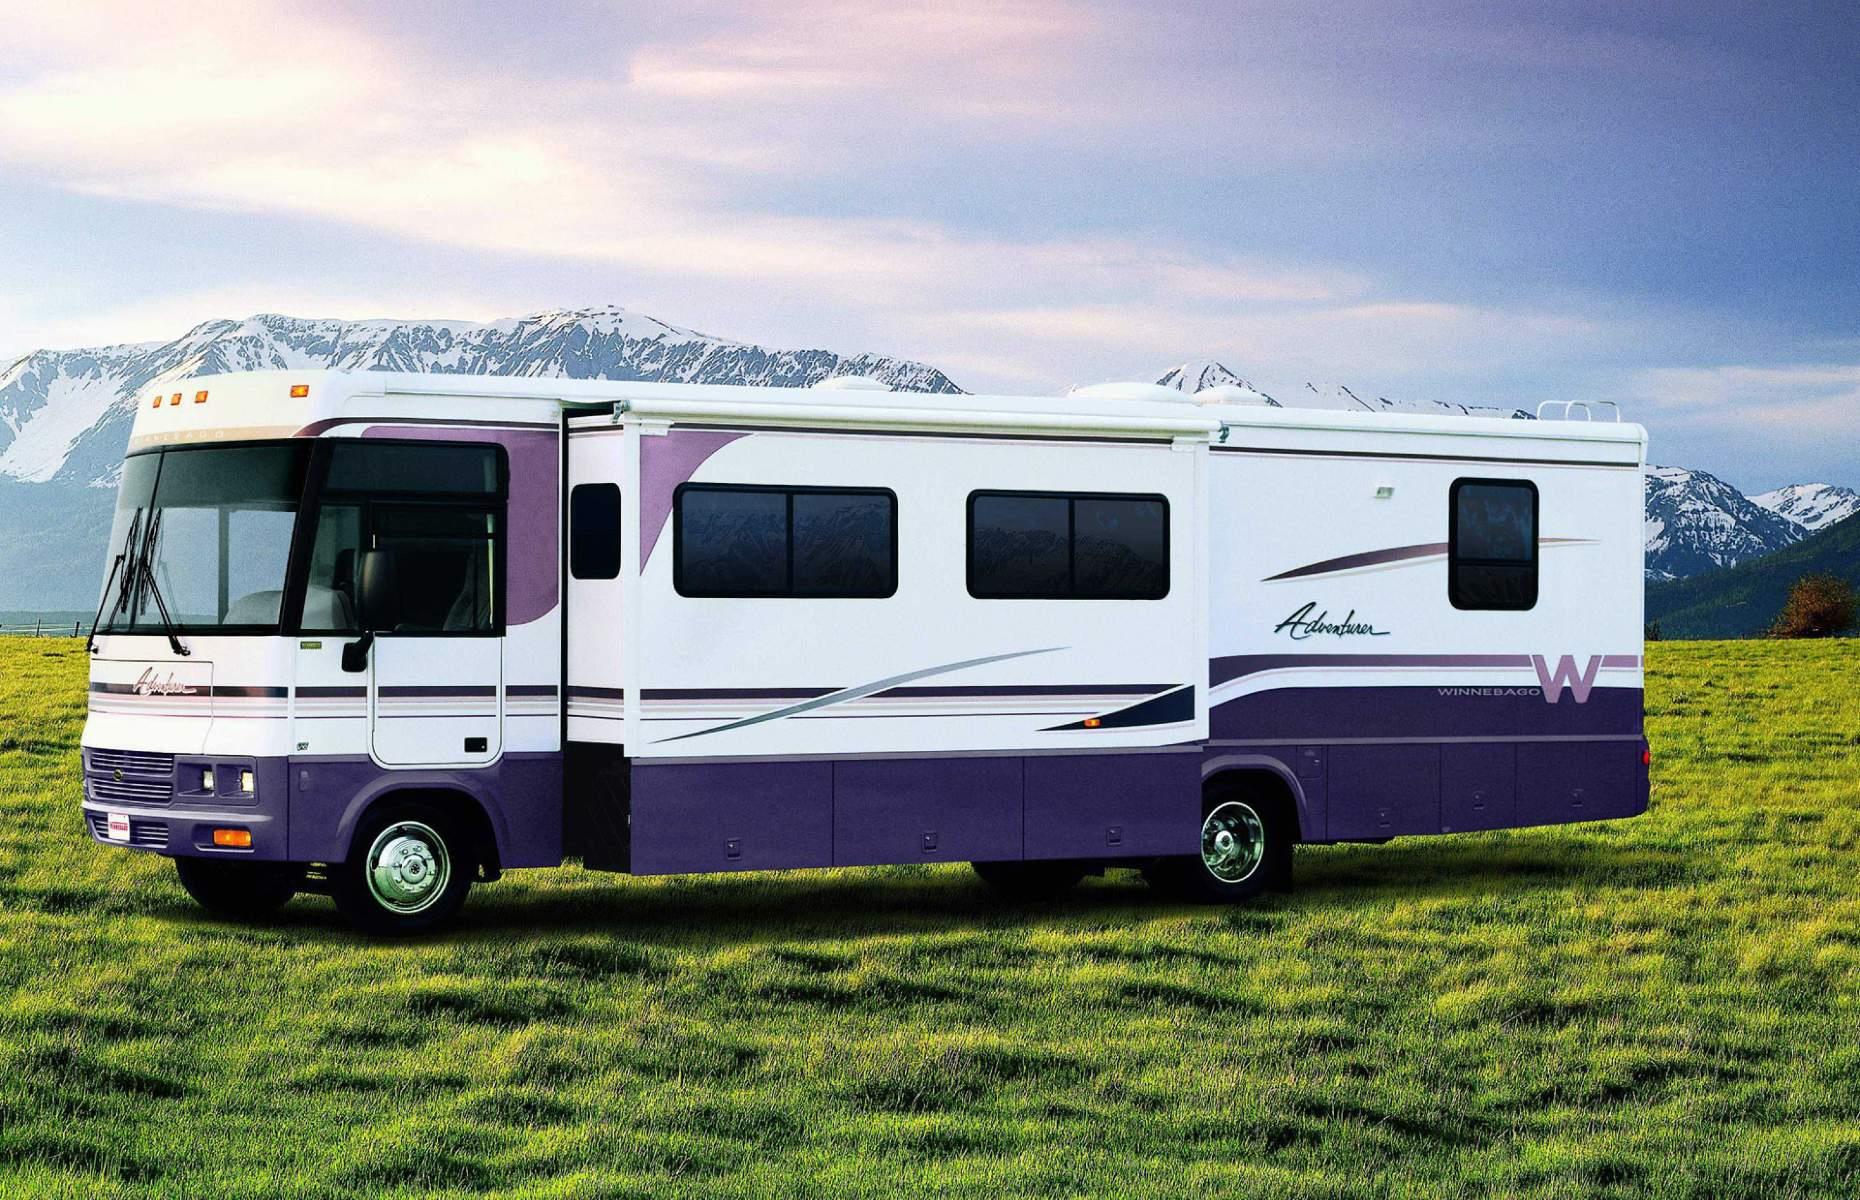 The Winnebago Adventurer, pictured, became increasingly popular throughout the 2000s and was the top-selling motorhome by 2012, according to data from Statistical Surveys. The Class A gas-powered RV had spacious and comfortable interiors, a well-equipped kitchen and ample storage space, making it a great choice for many families.